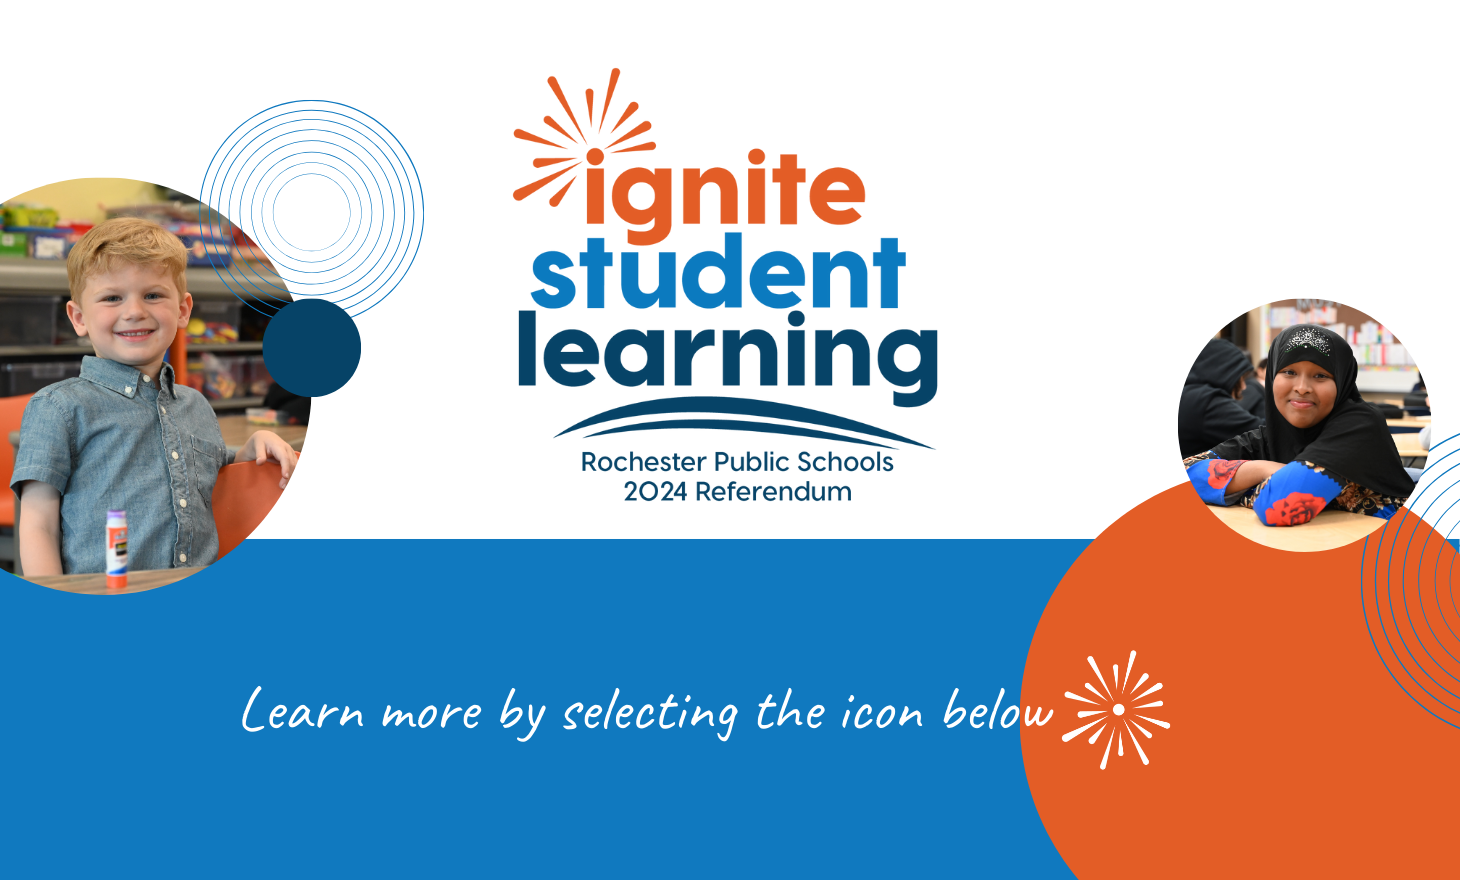 Ignite student learning: Rochester Public Schools 2024 Referendum learn more by selecting the icon below